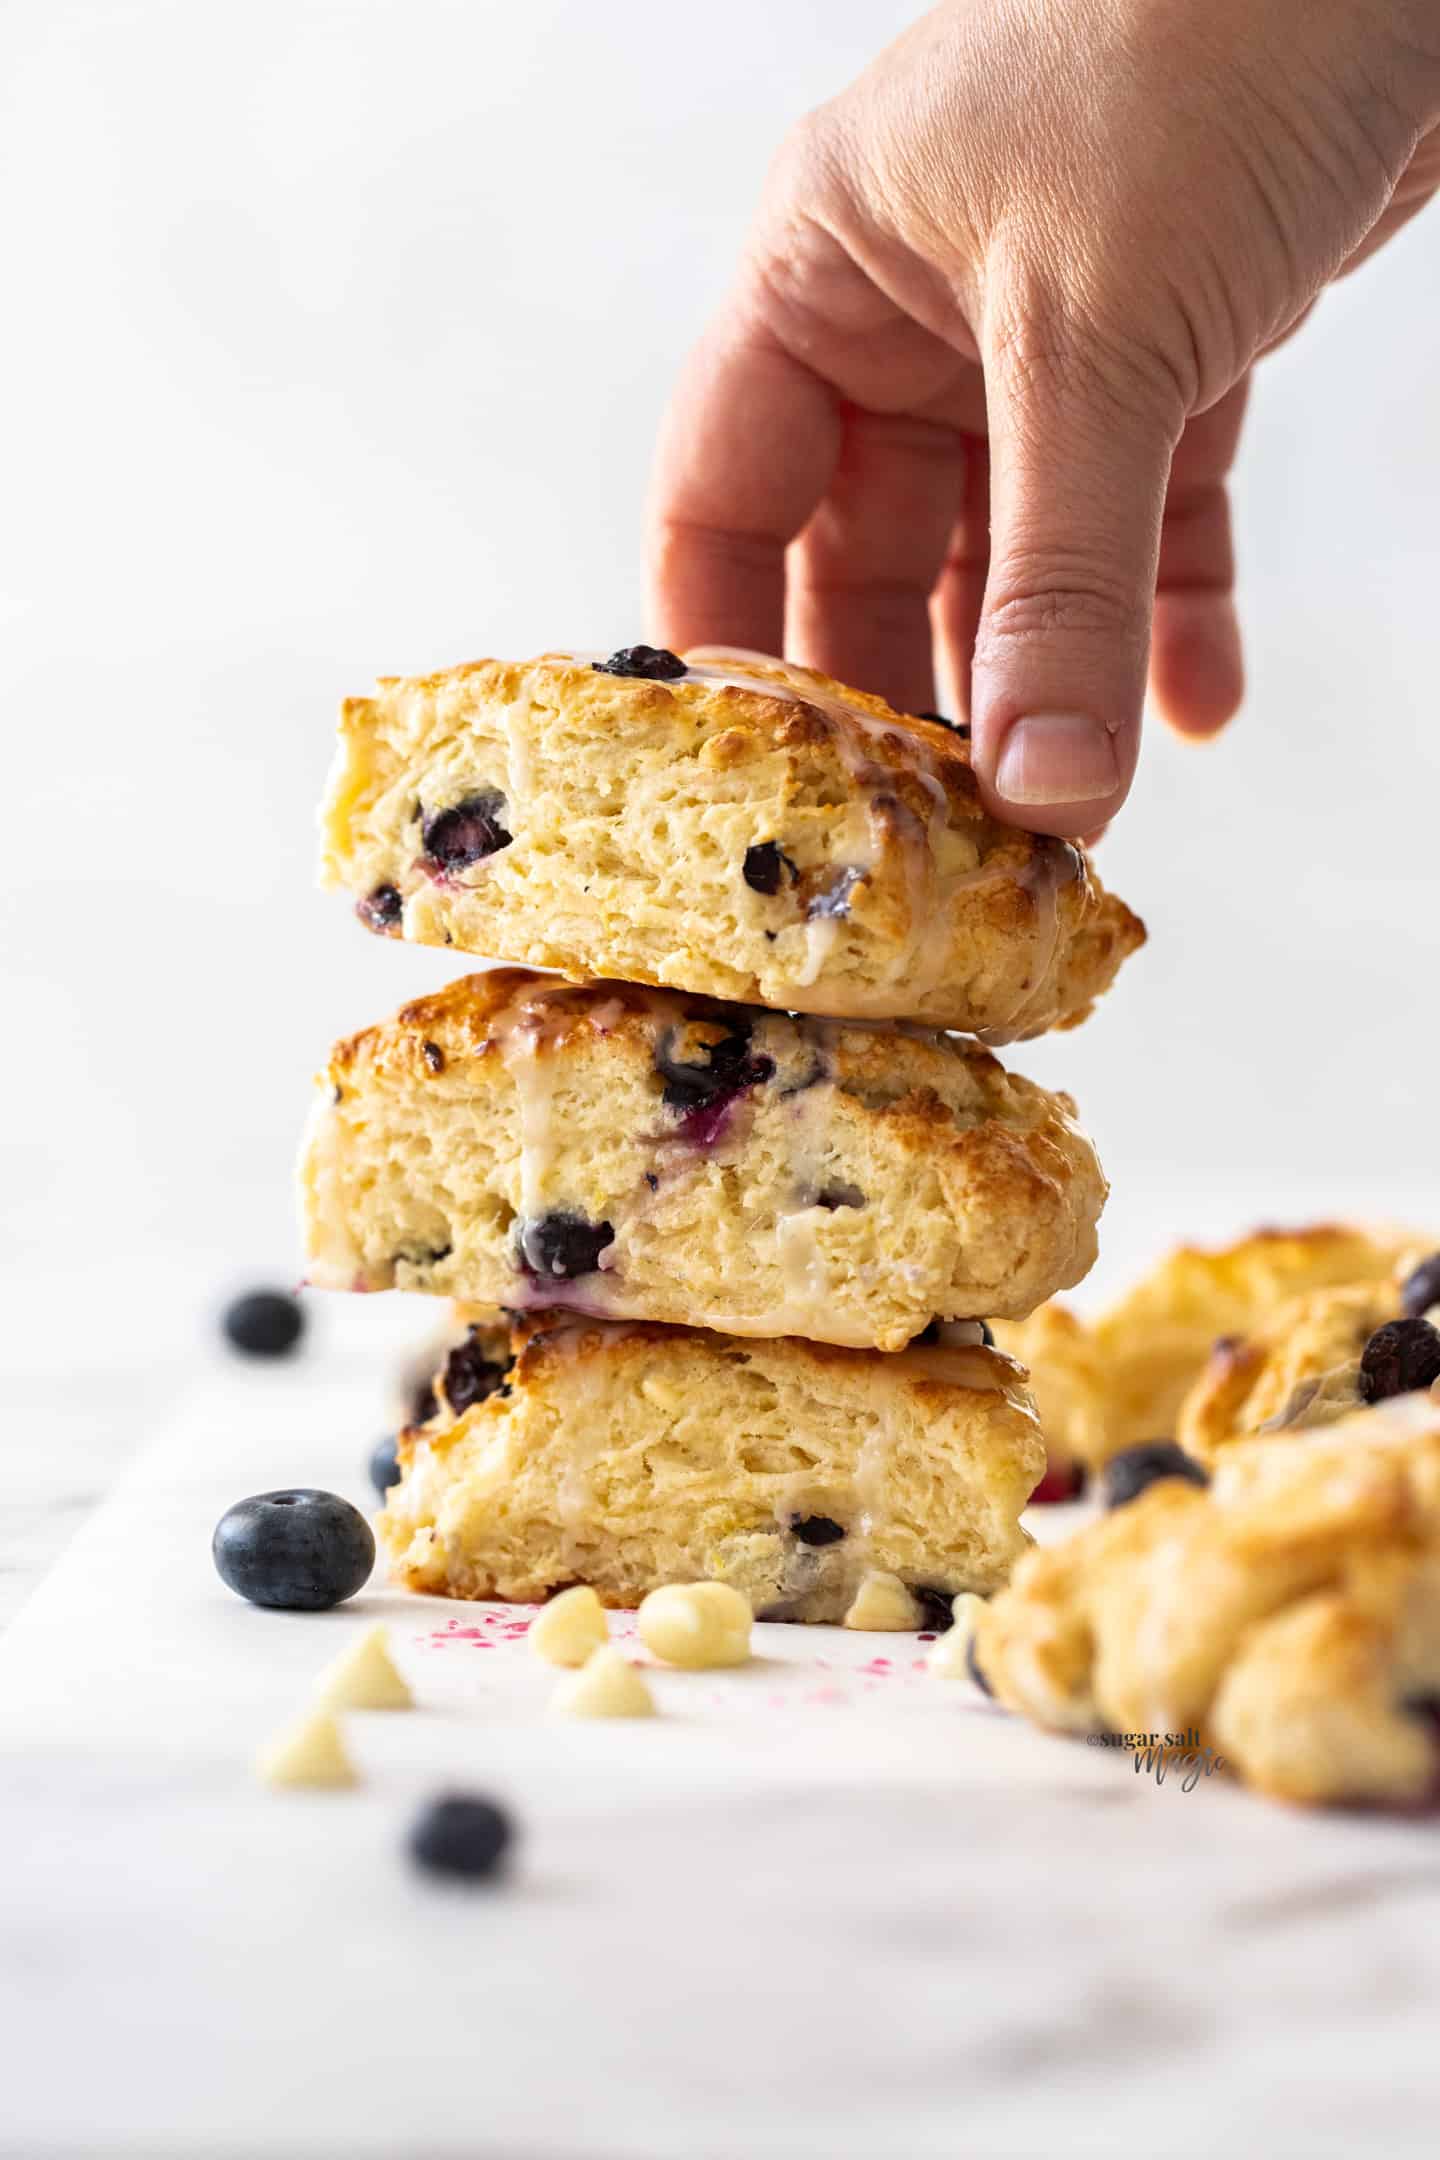 A stack of 3 scones with a hand grabbing the one on top.